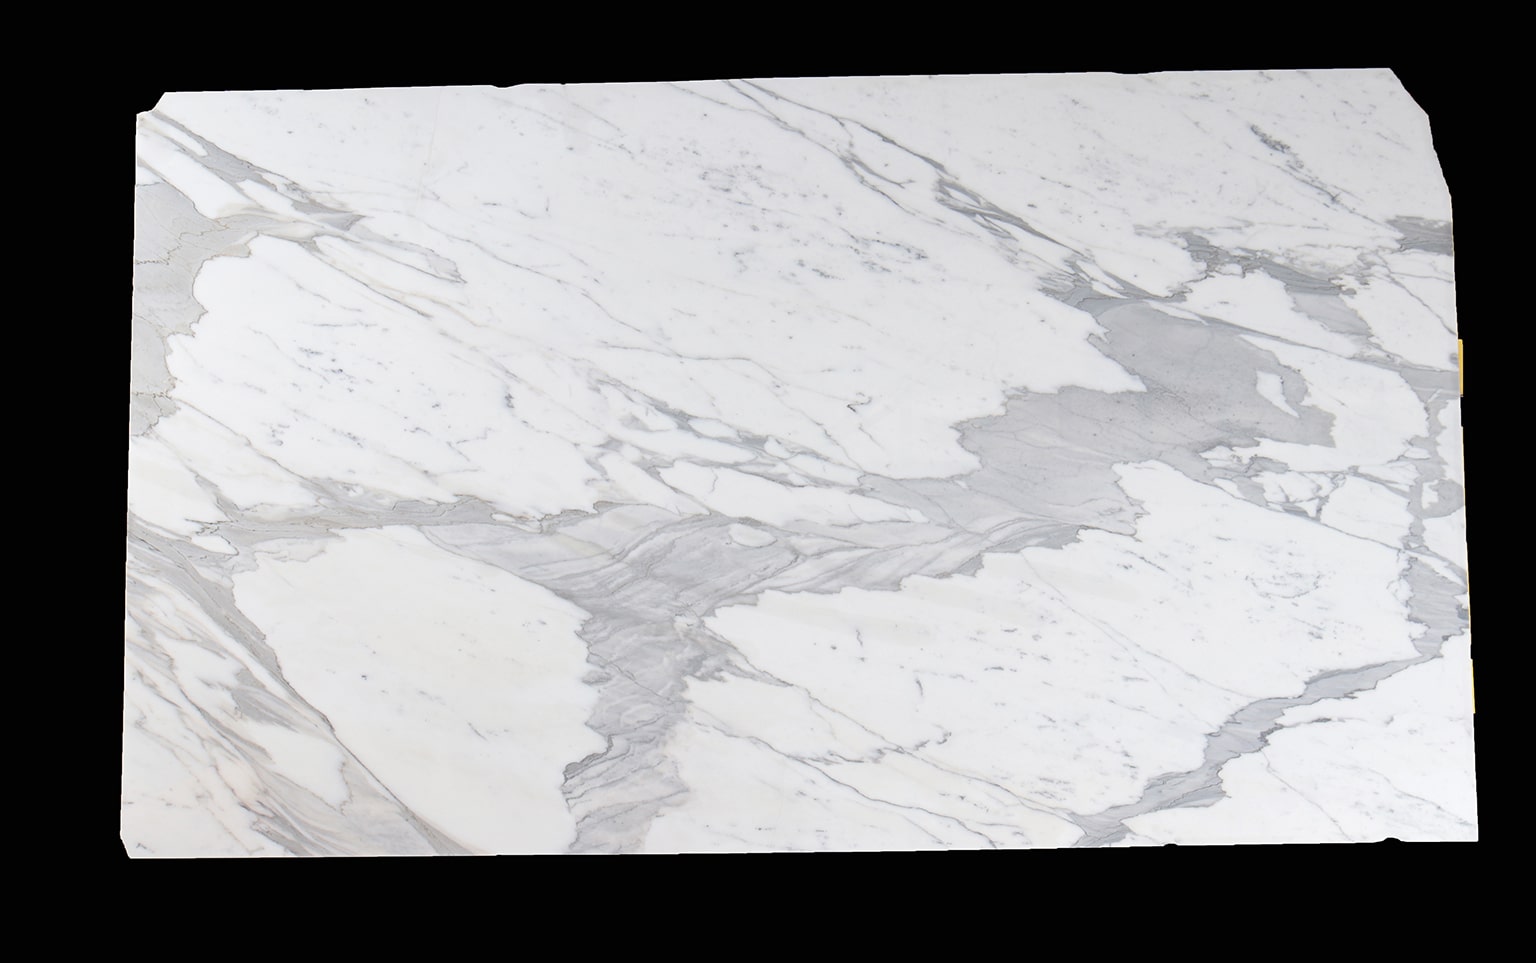 Sample slab digitized using a photo booth